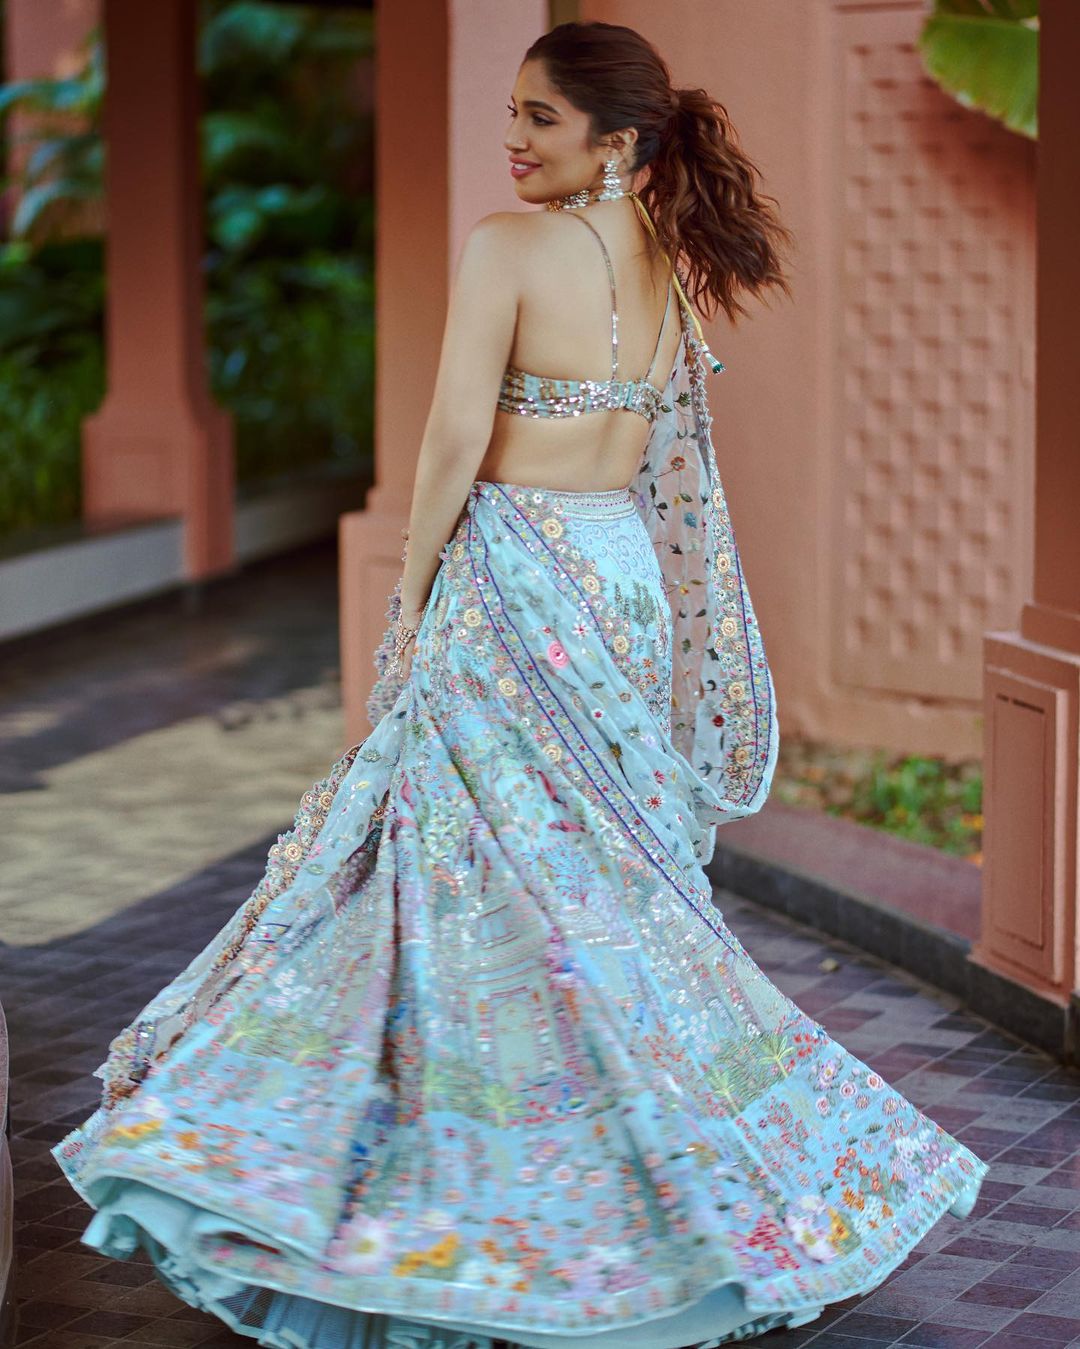 Sleeveless Blouse Design For A Breezy Summer Wedding - West India Fashion